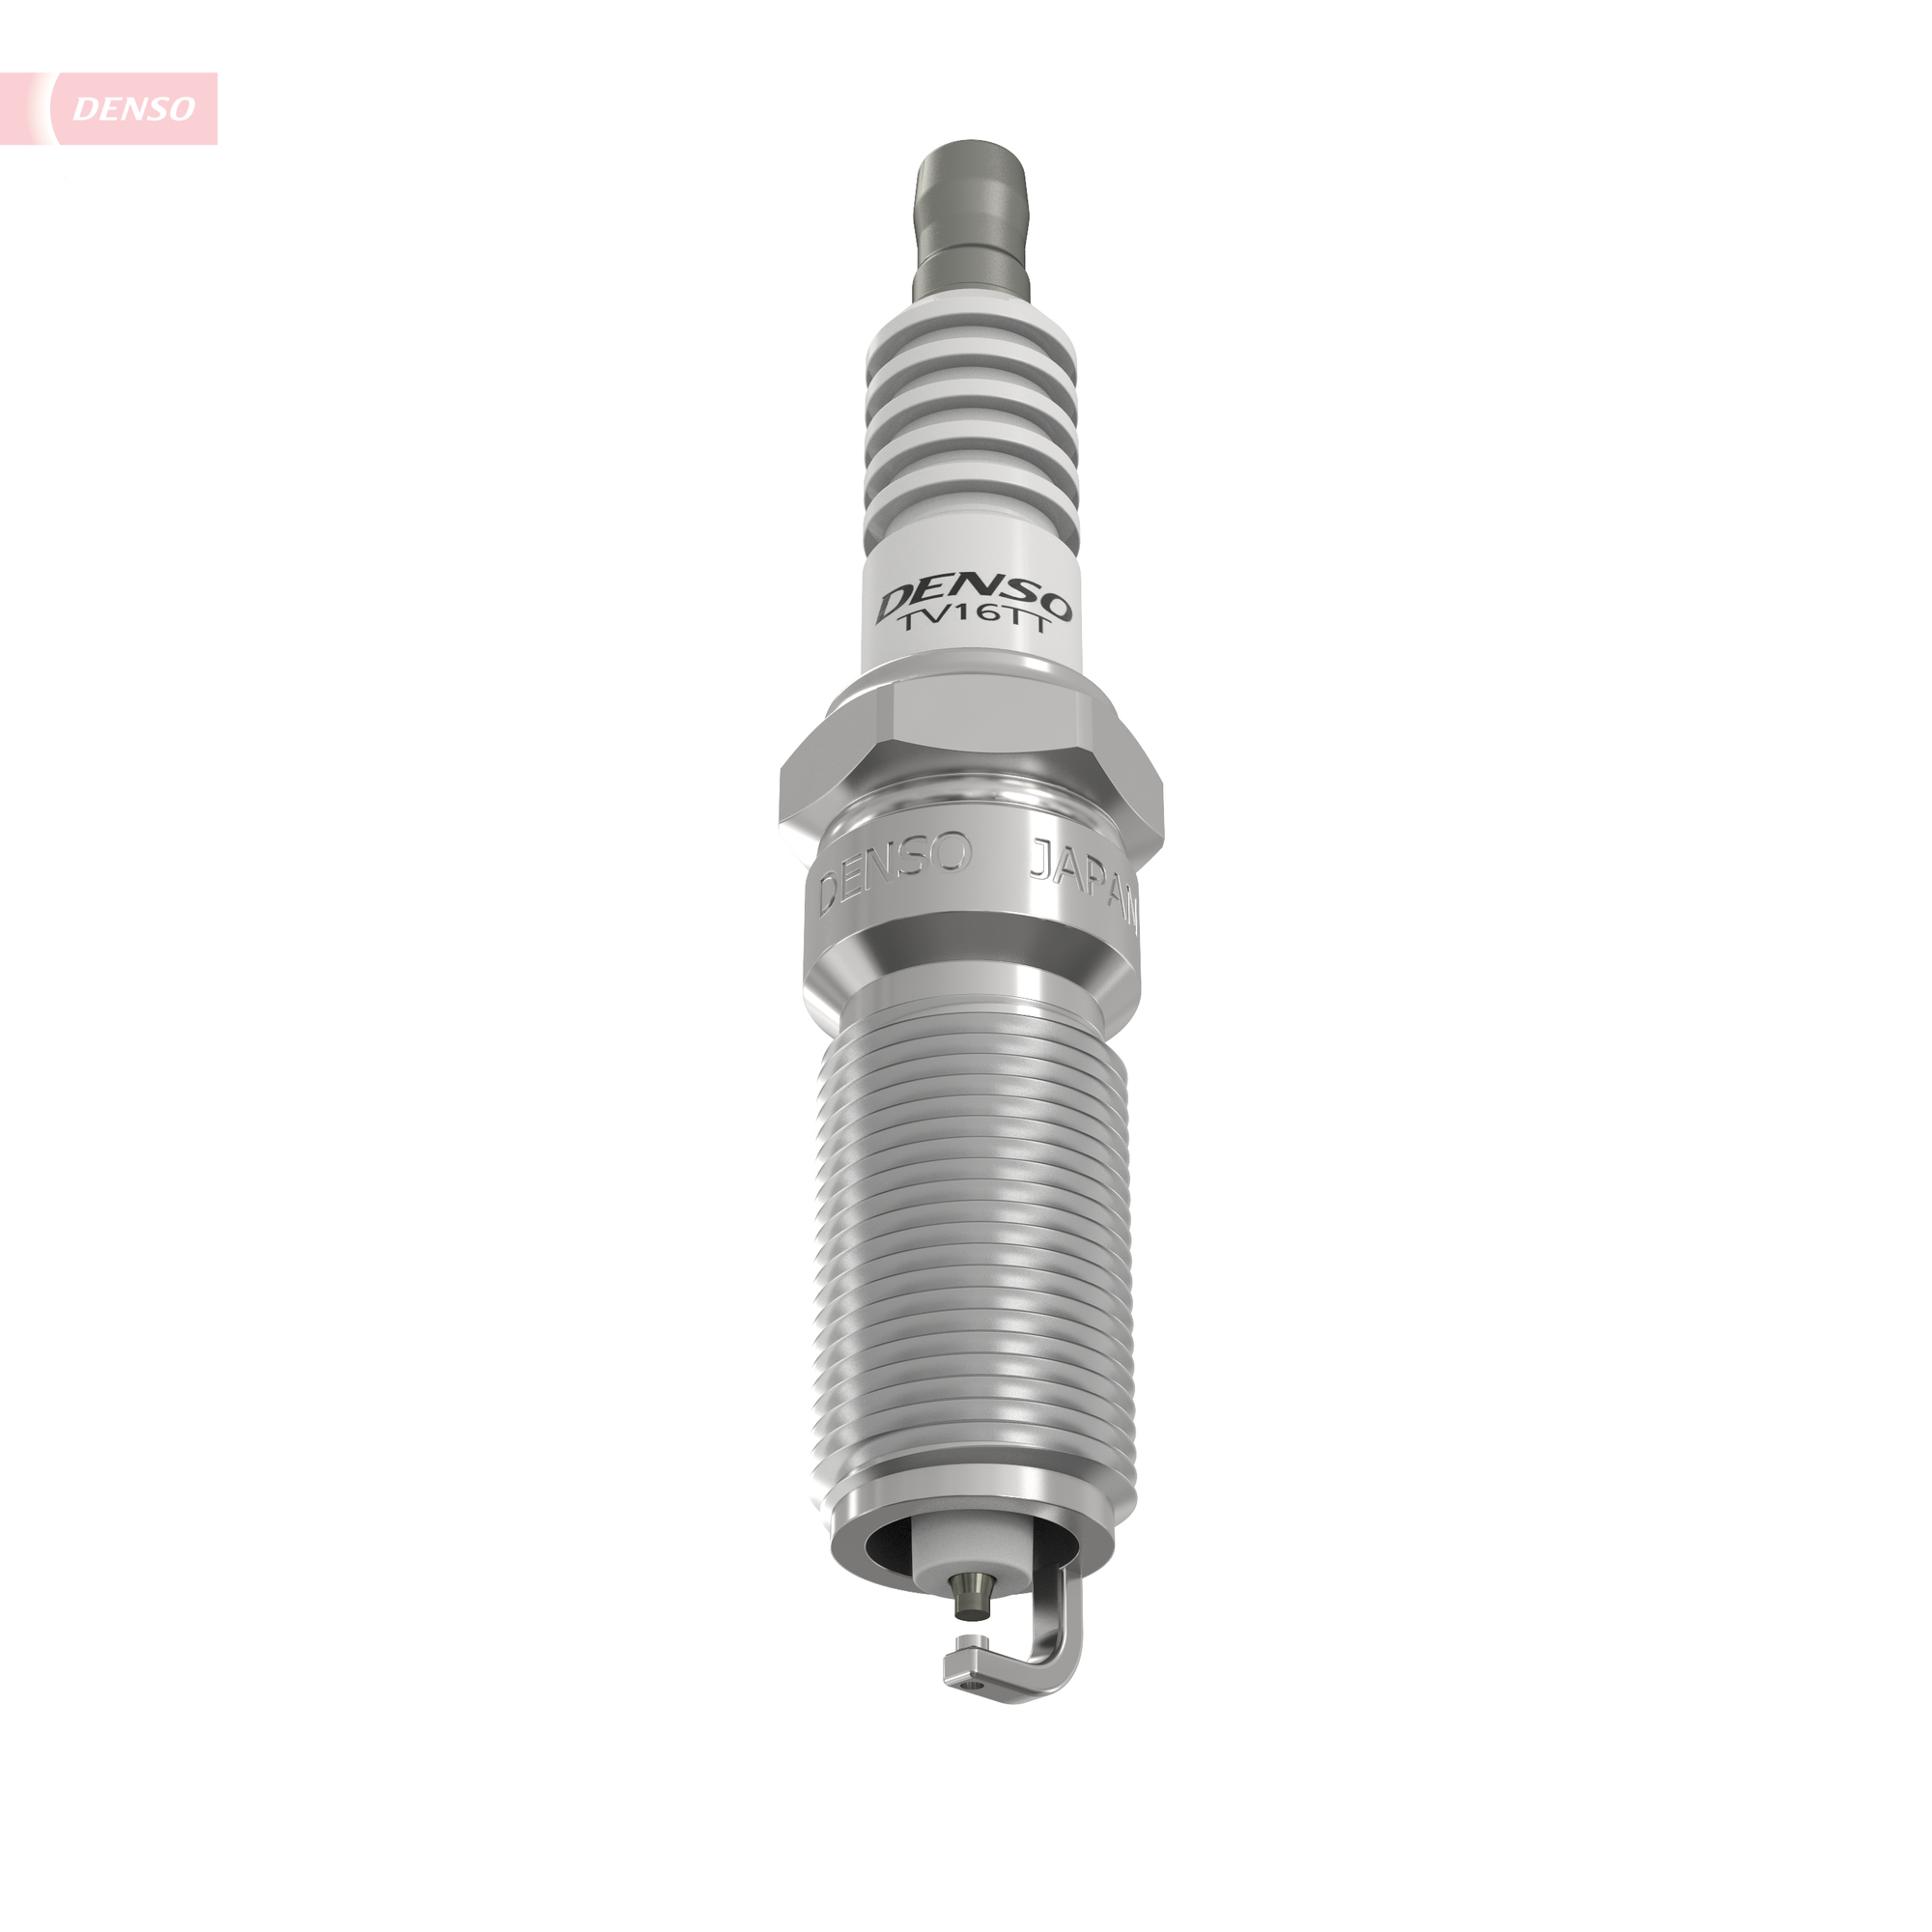 Picture of DENSO - TV16TT - Spark Plug (Ignition System)